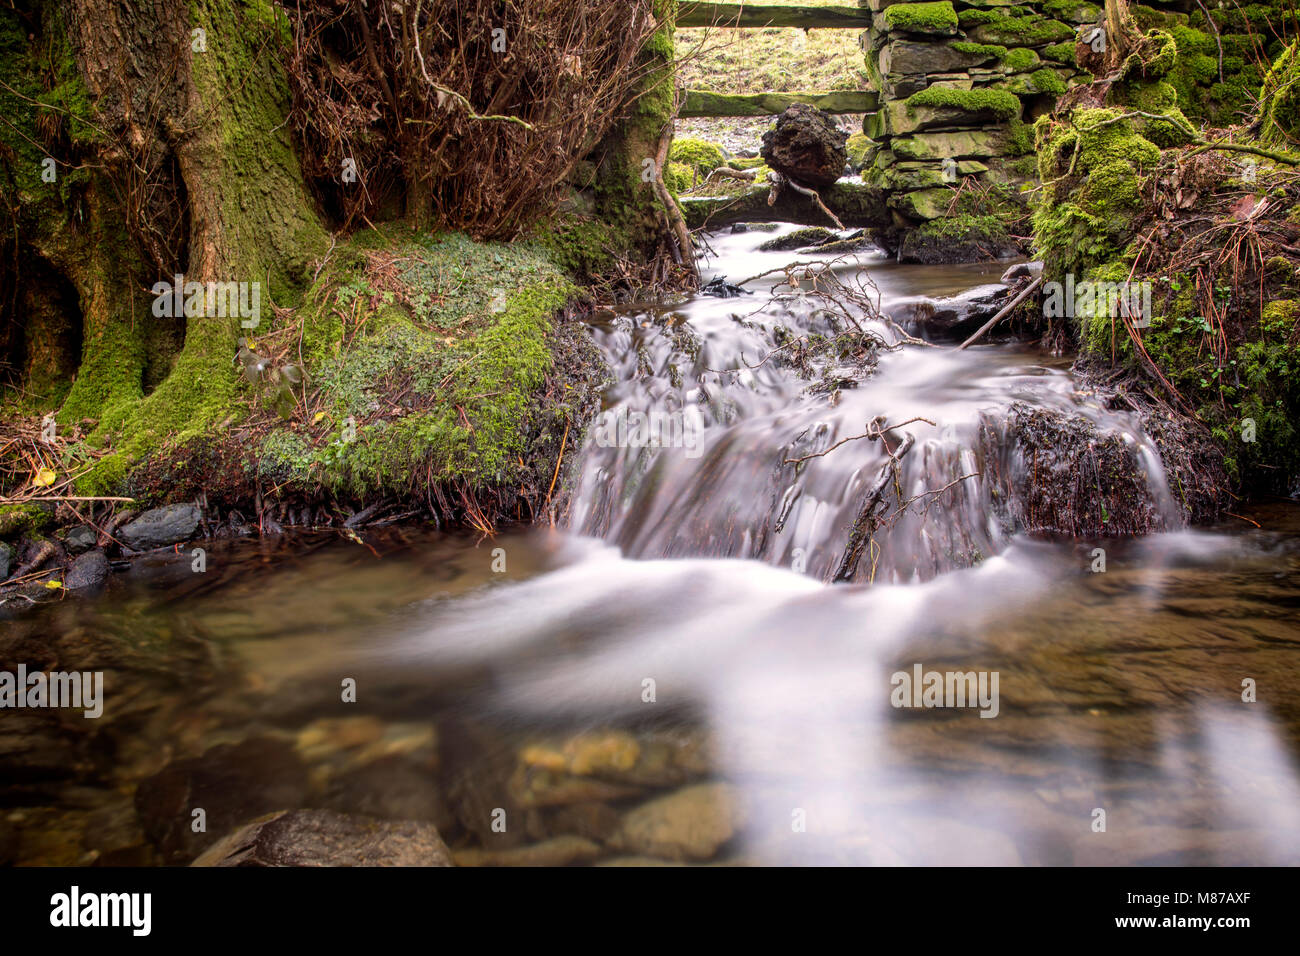 Otley Beck runs down from Lowick Common into the Crake Valley with small springs and streams such as this adding to it's volume as it goes.   This par Stock Photo